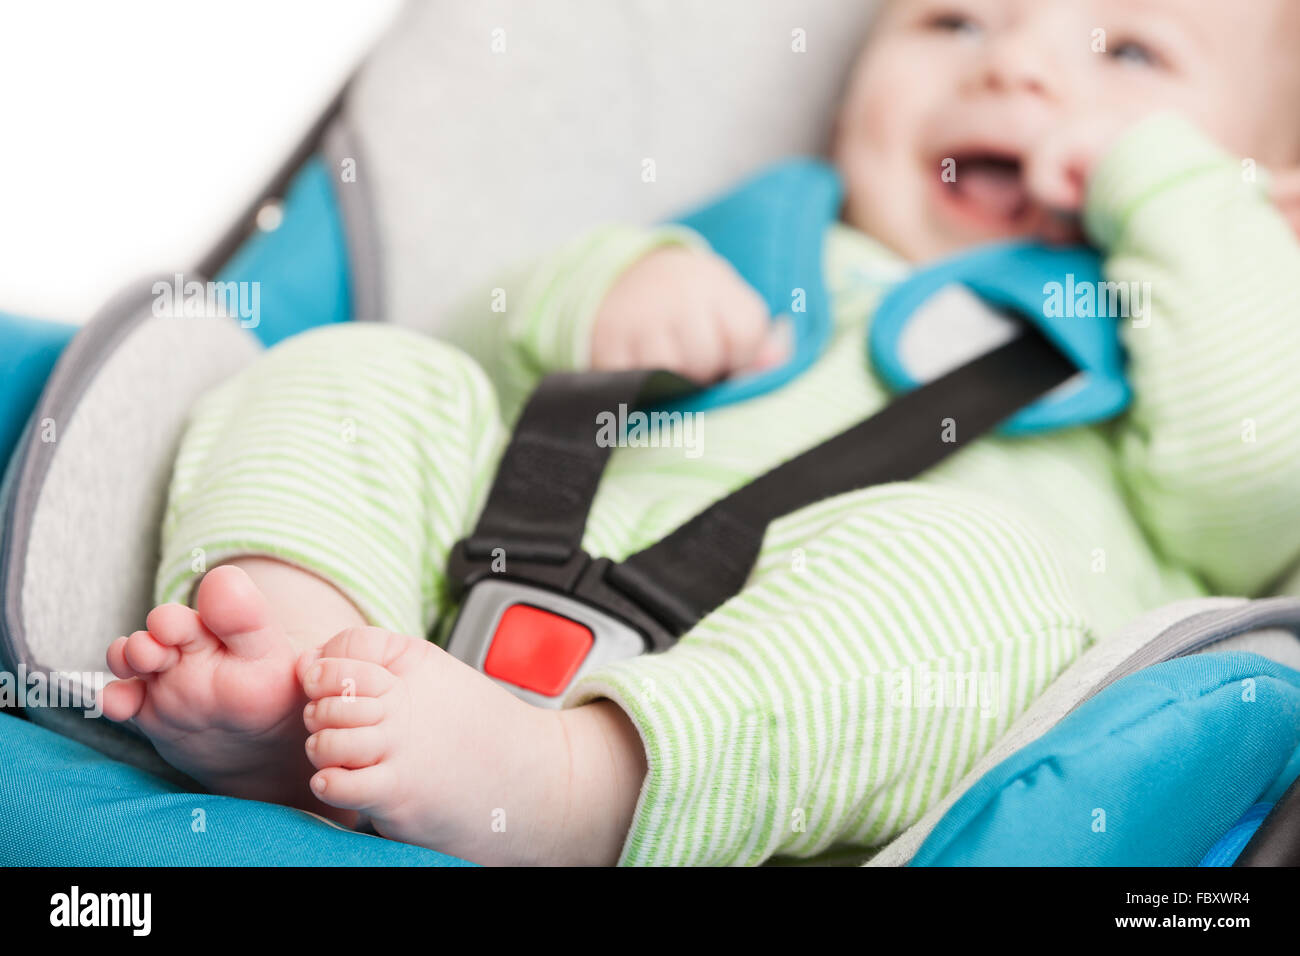 Little baby child in safety car seat Stock Photo